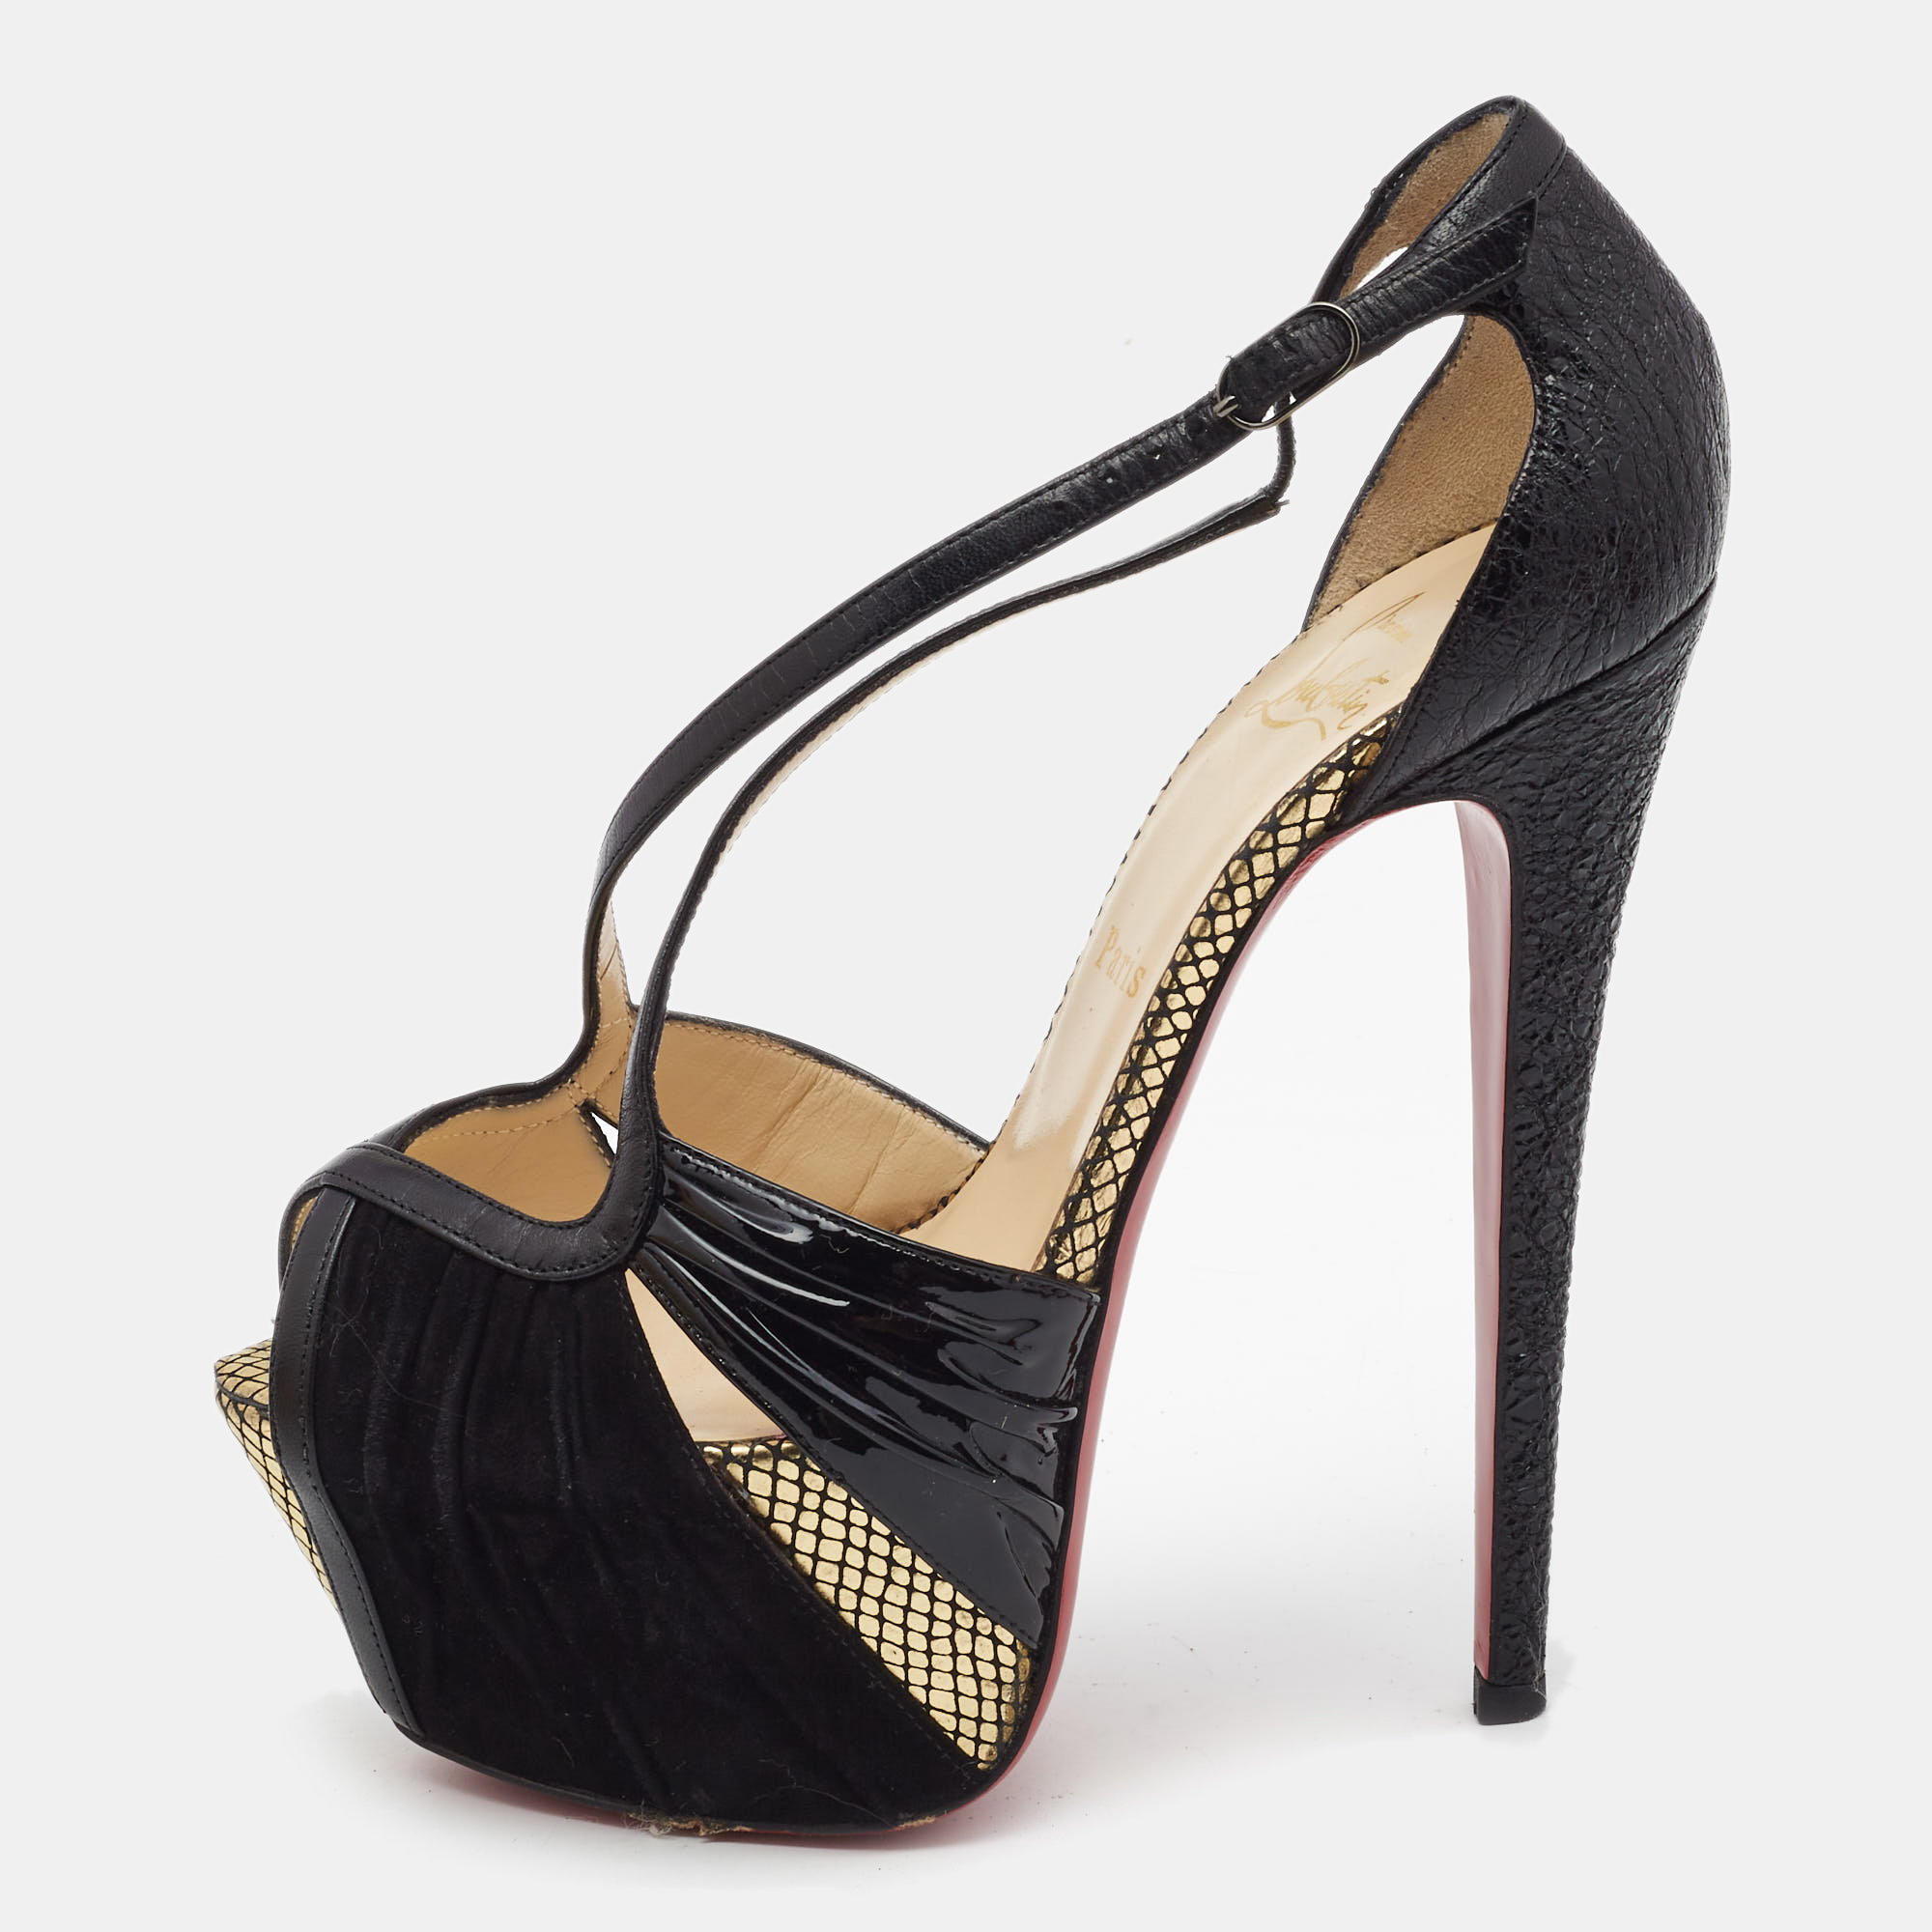 Pre-owned Christian Louboutin Black Patent Leather And Suede Divinoche Platform Pumps Size 38.5